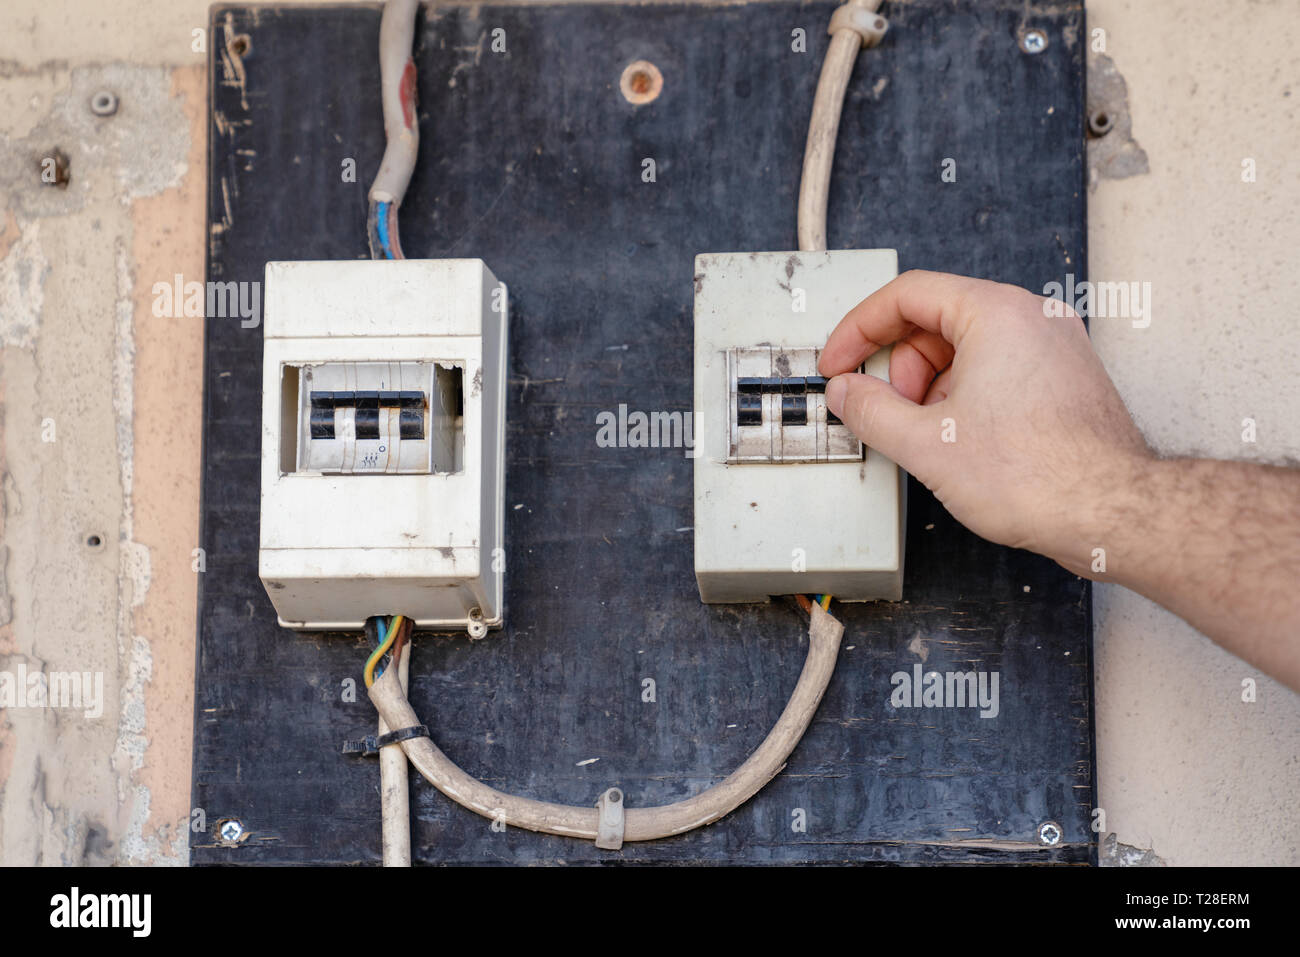 Electrician check or Inspect Electrical System circuit Breaker on Power Distribution panel. Stock Photo